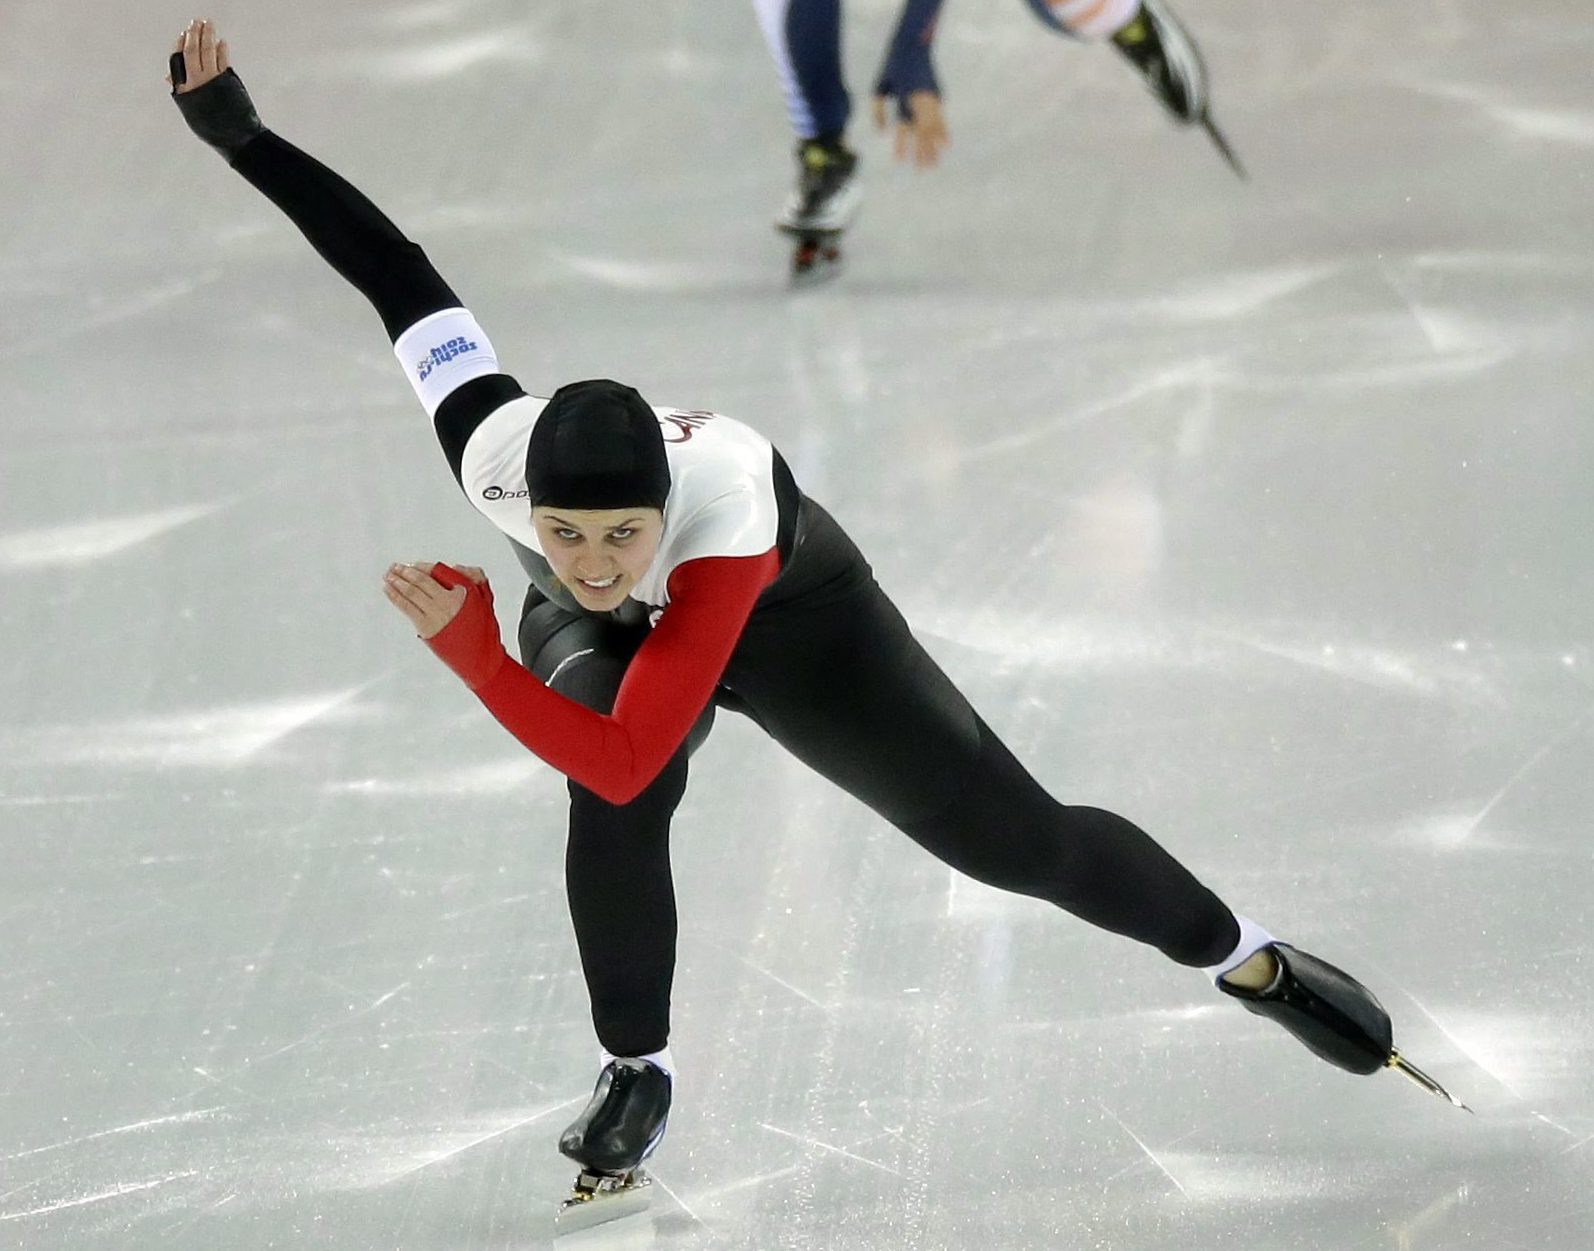 Canada's Marsha Hudey competes in the first heat of the women's 500-metre speed skating race at the Adler Arena Skating Center during the 2014 Winter Olympics, Tuesday, Feb. 11, 2014, in Sochi, Russia. (AP Photo/David J. Phillip )